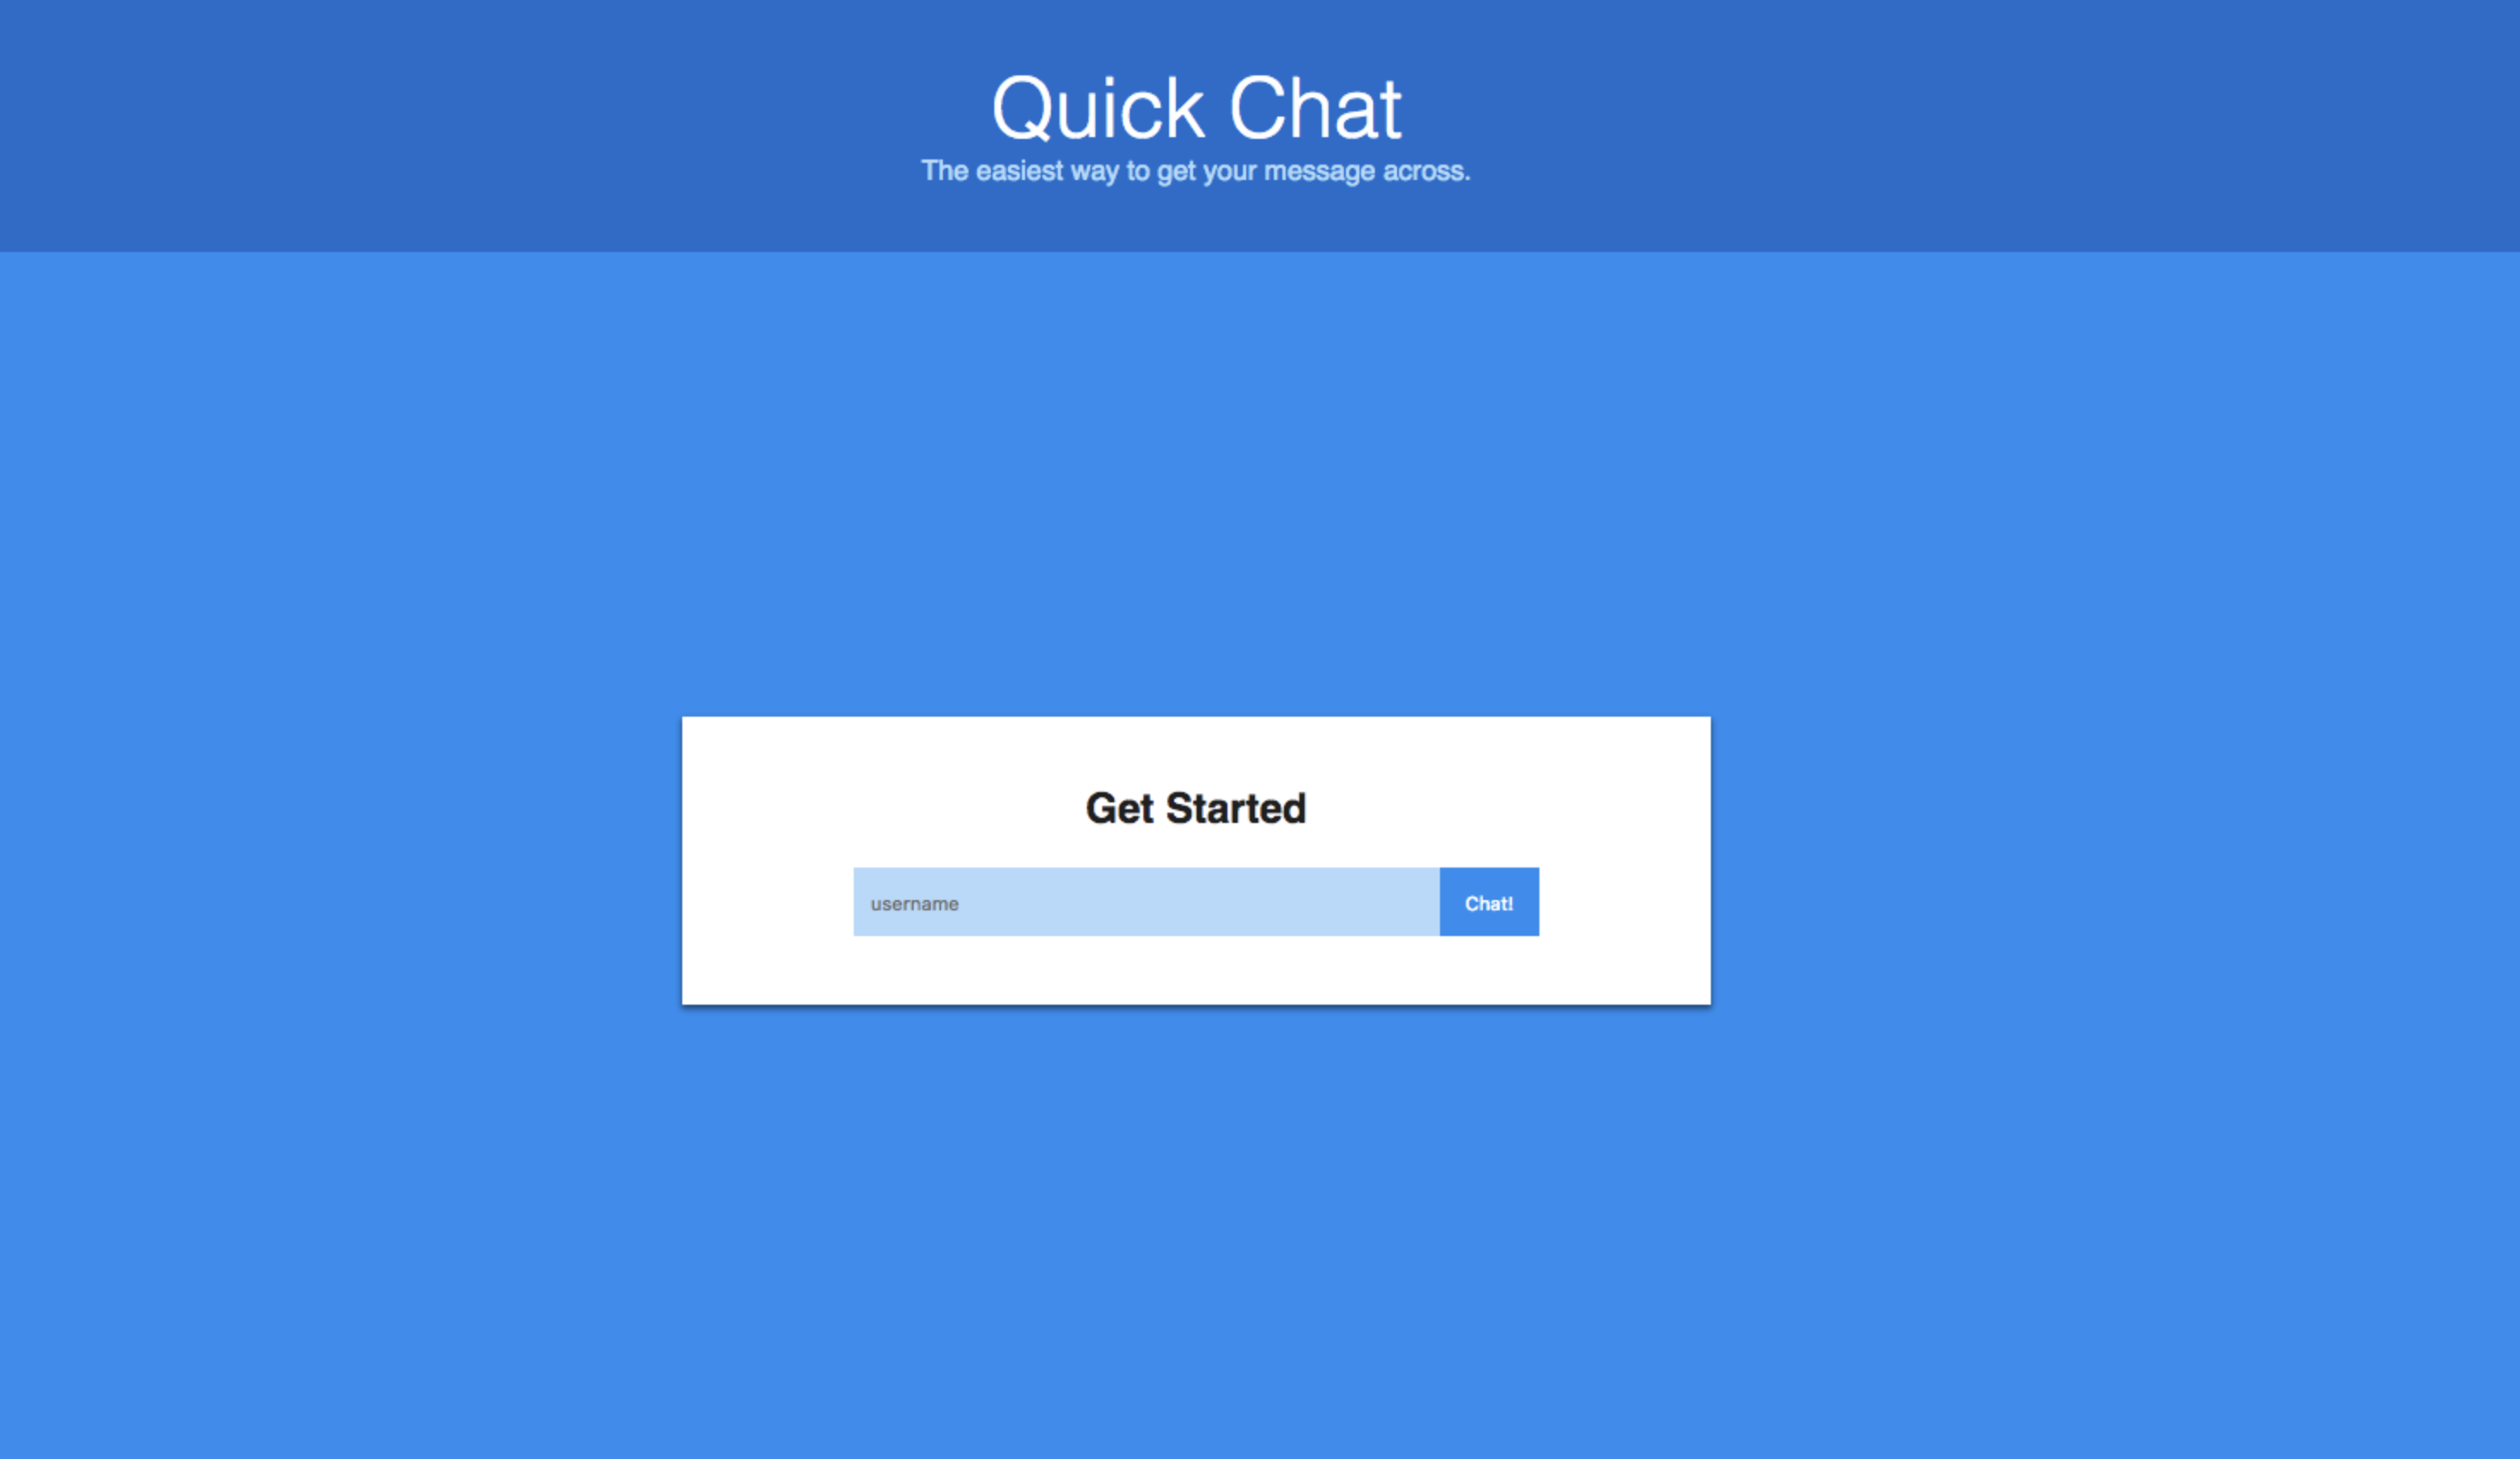 Landing page for the Quick Chat test application